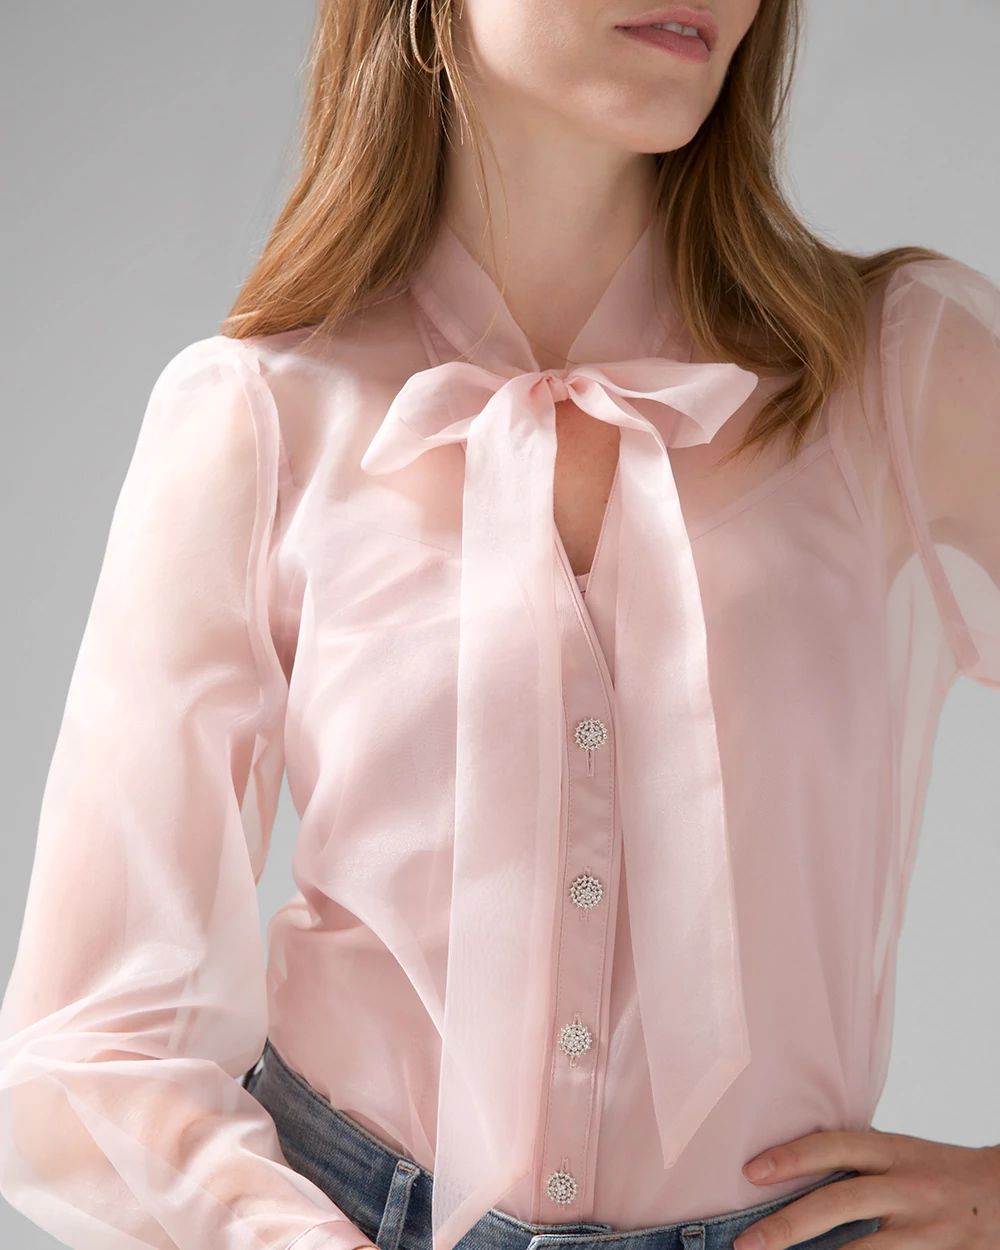 Jewel Button Tie-Neck Blouse click to view larger image.